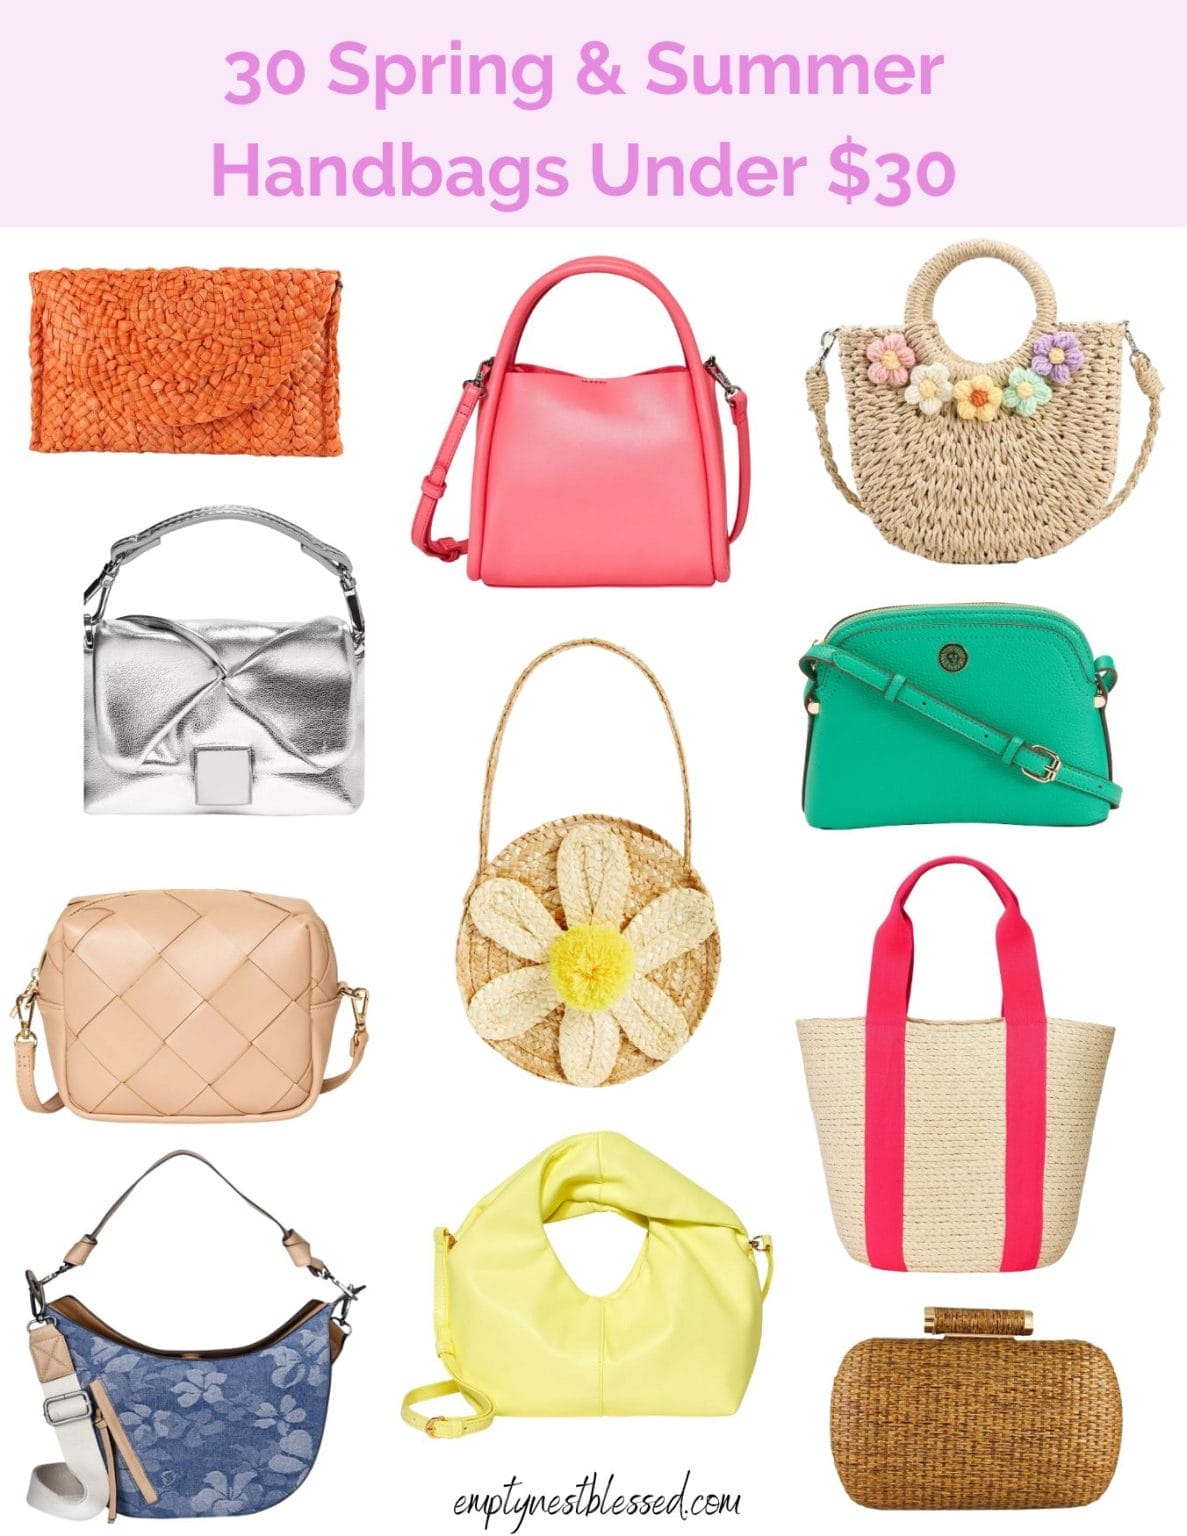 Collage of 30 spring and summer handbags under 30 dollars